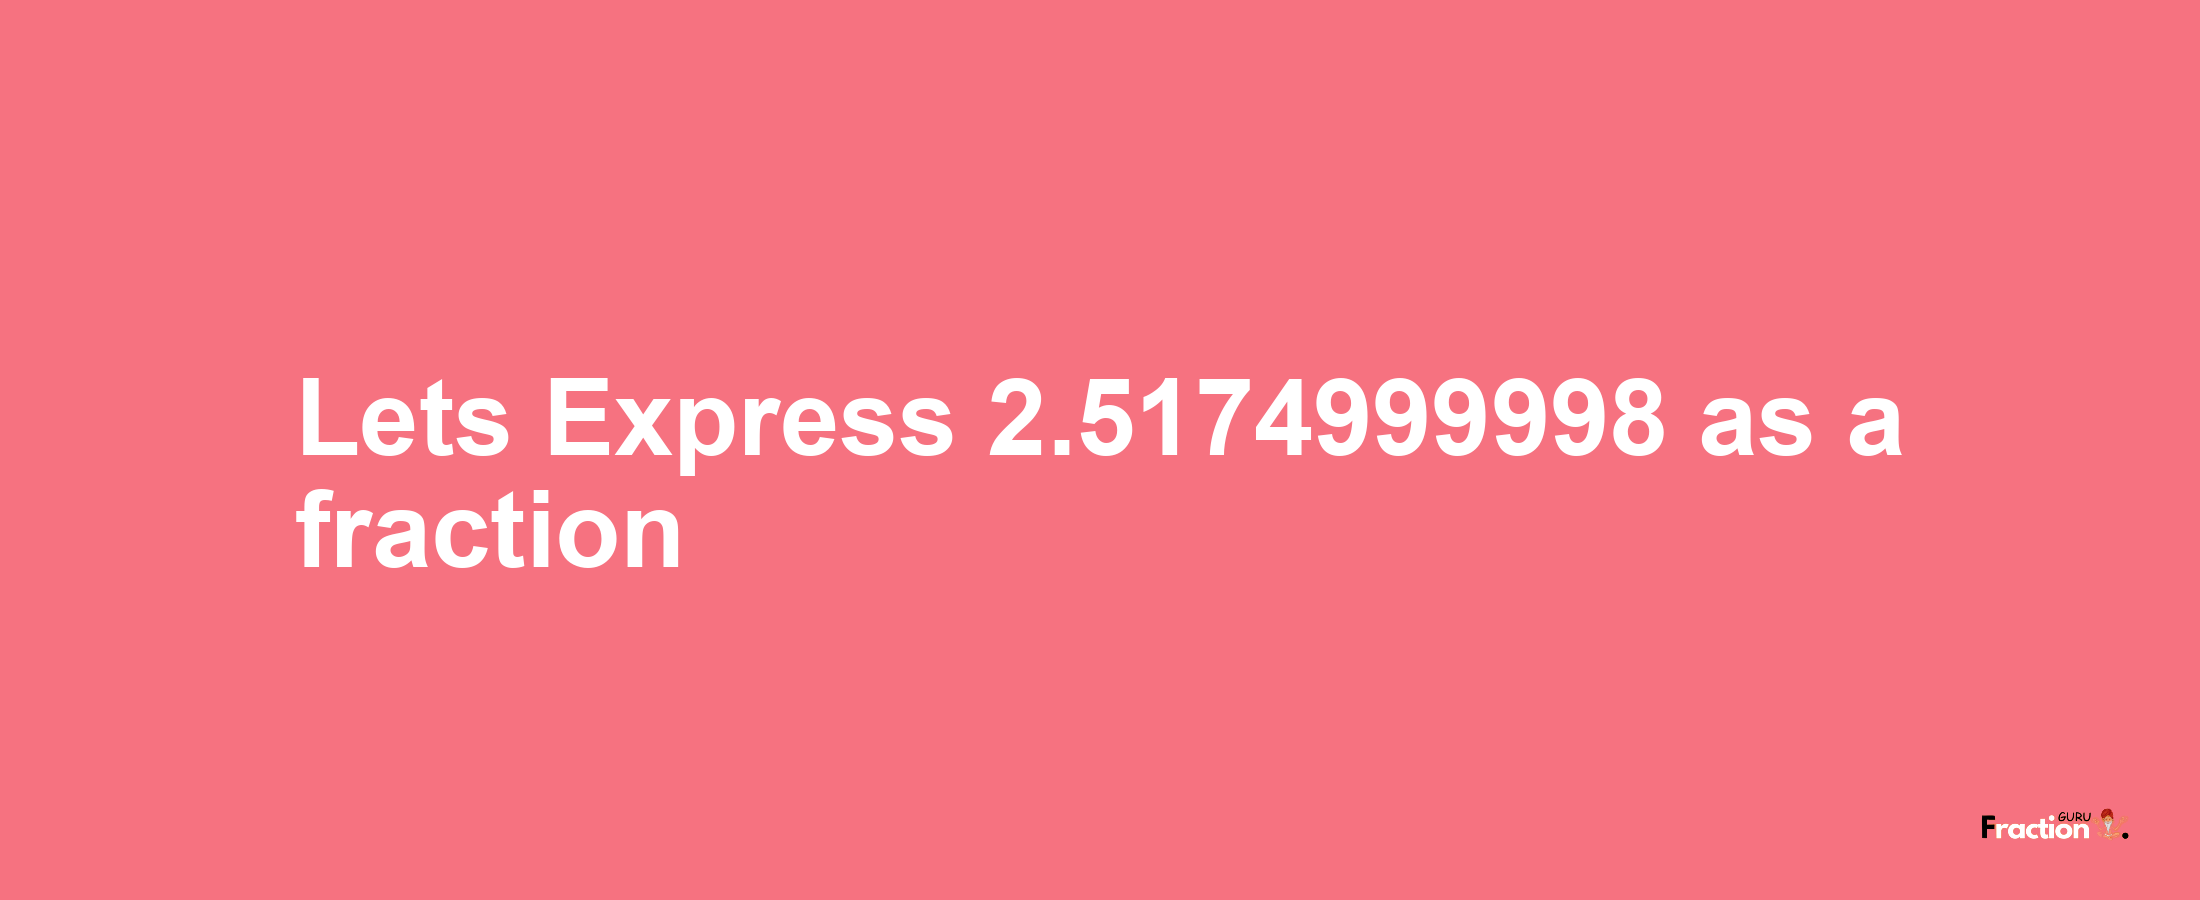 Lets Express 2.5174999998 as afraction